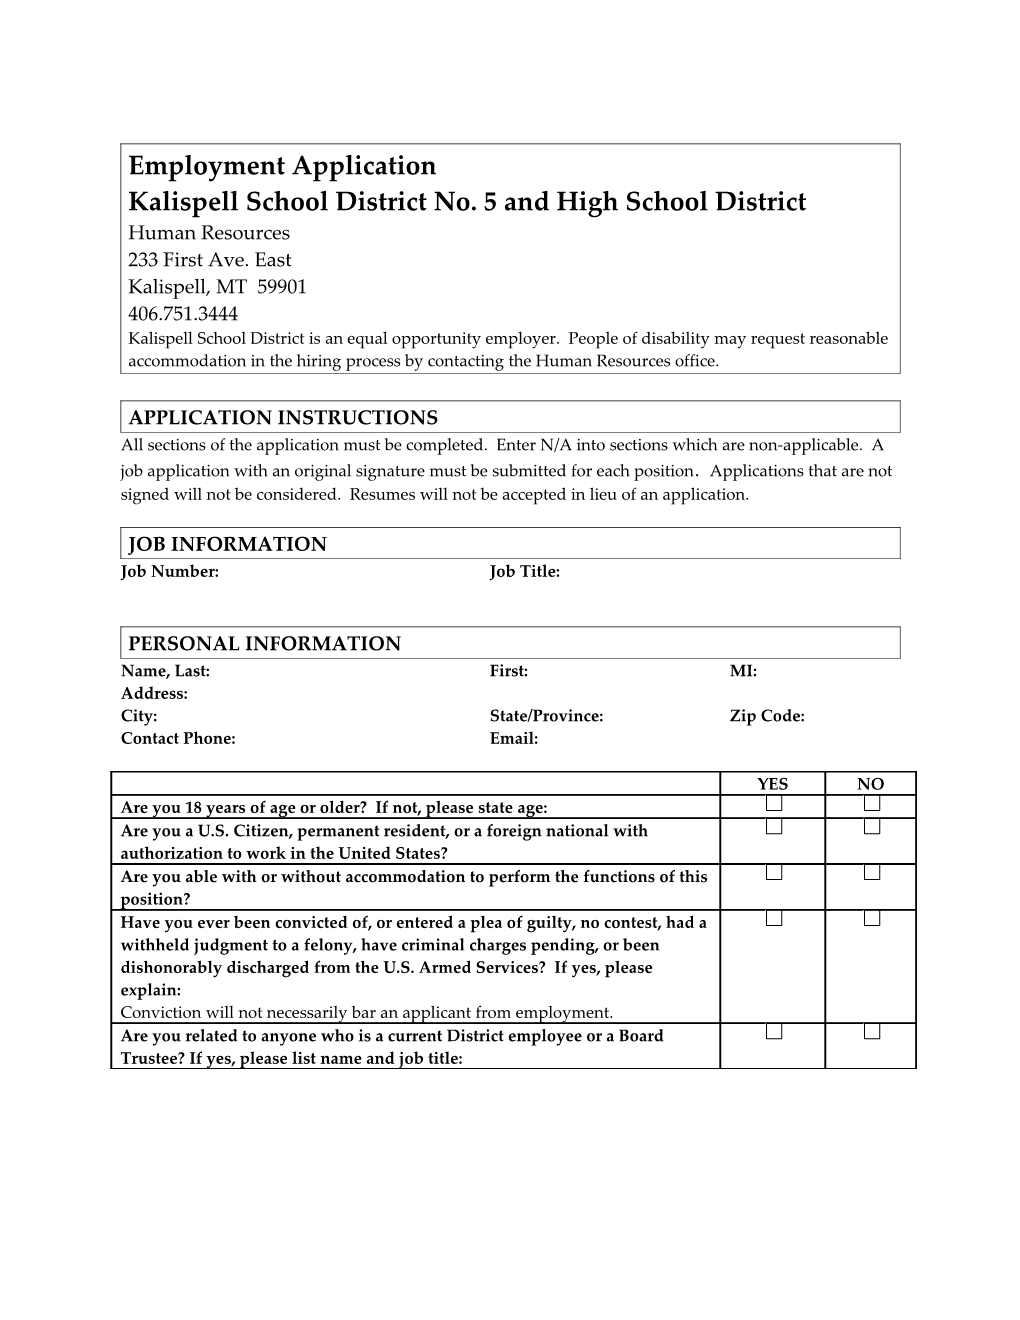 Kalispell School District No. 5 and High School District